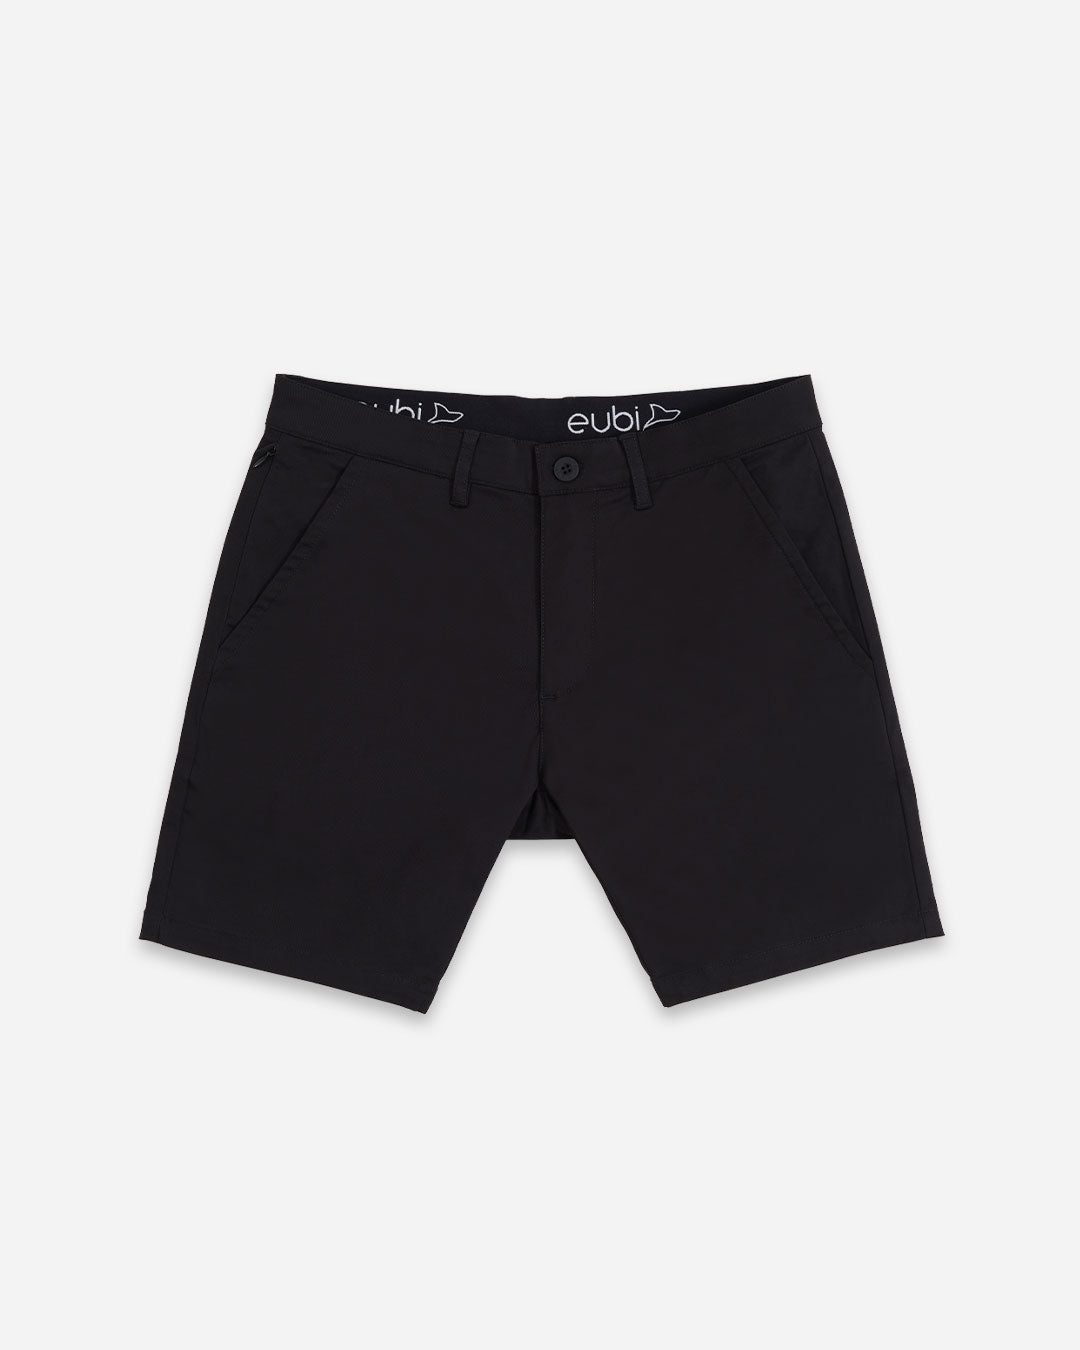 7" All Day Chino Shorts 3.0 (Slim Fit)